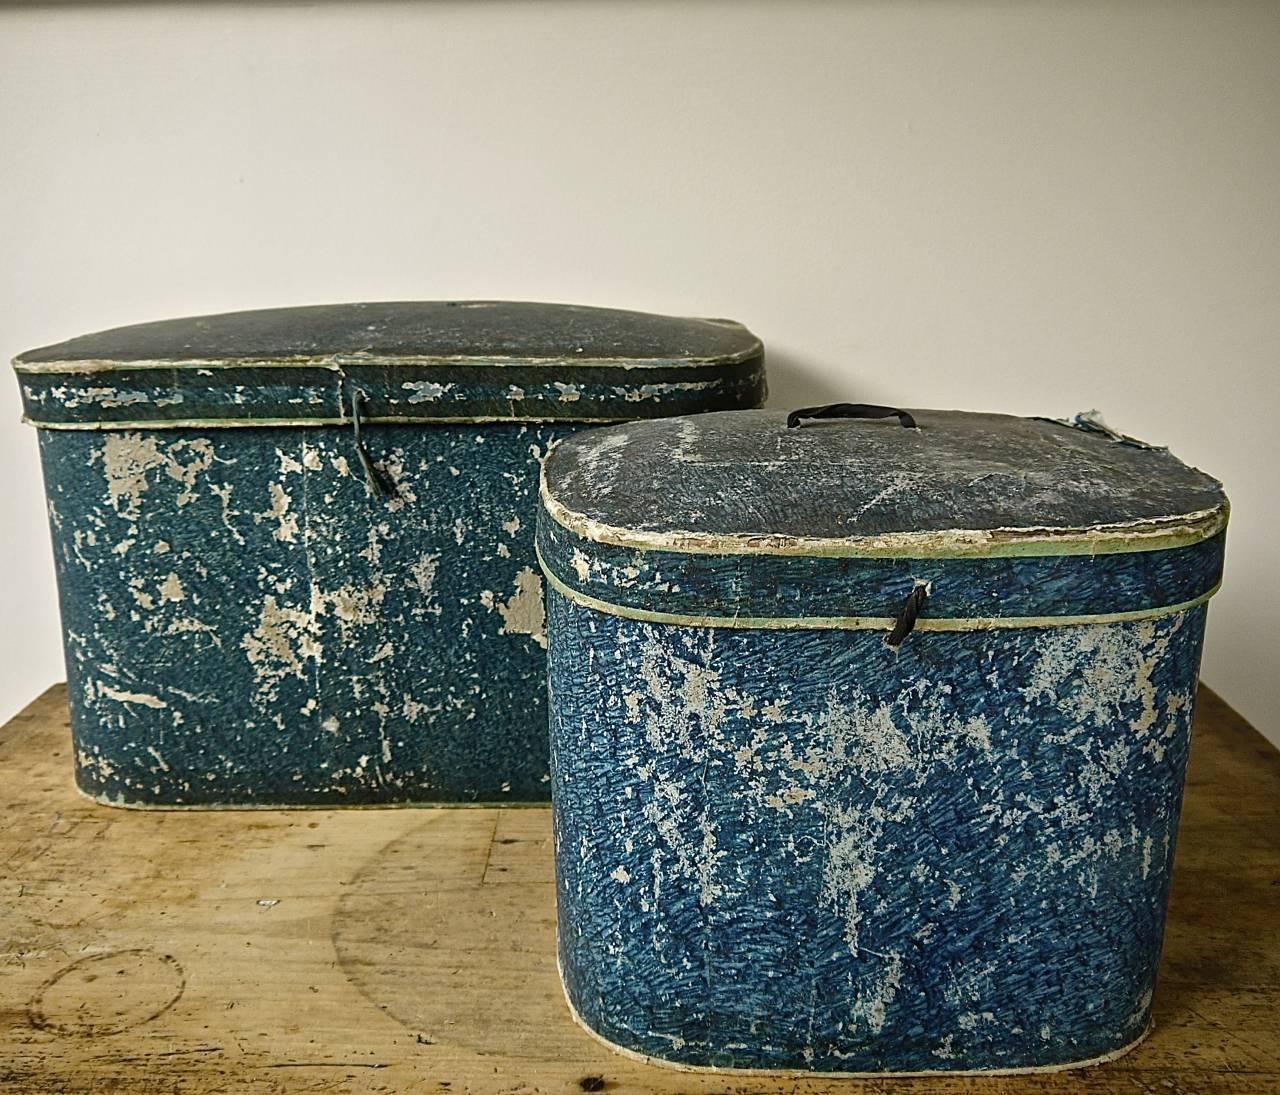 Pair of French late 19th century papier mâché hat boxes in a beautiful shade of blue. Larger size has an interesting and unusual domed lid and oval shape. Both have their makers label 'Noel'.
Large box measures 49cm long x 29cm wide x 31cm